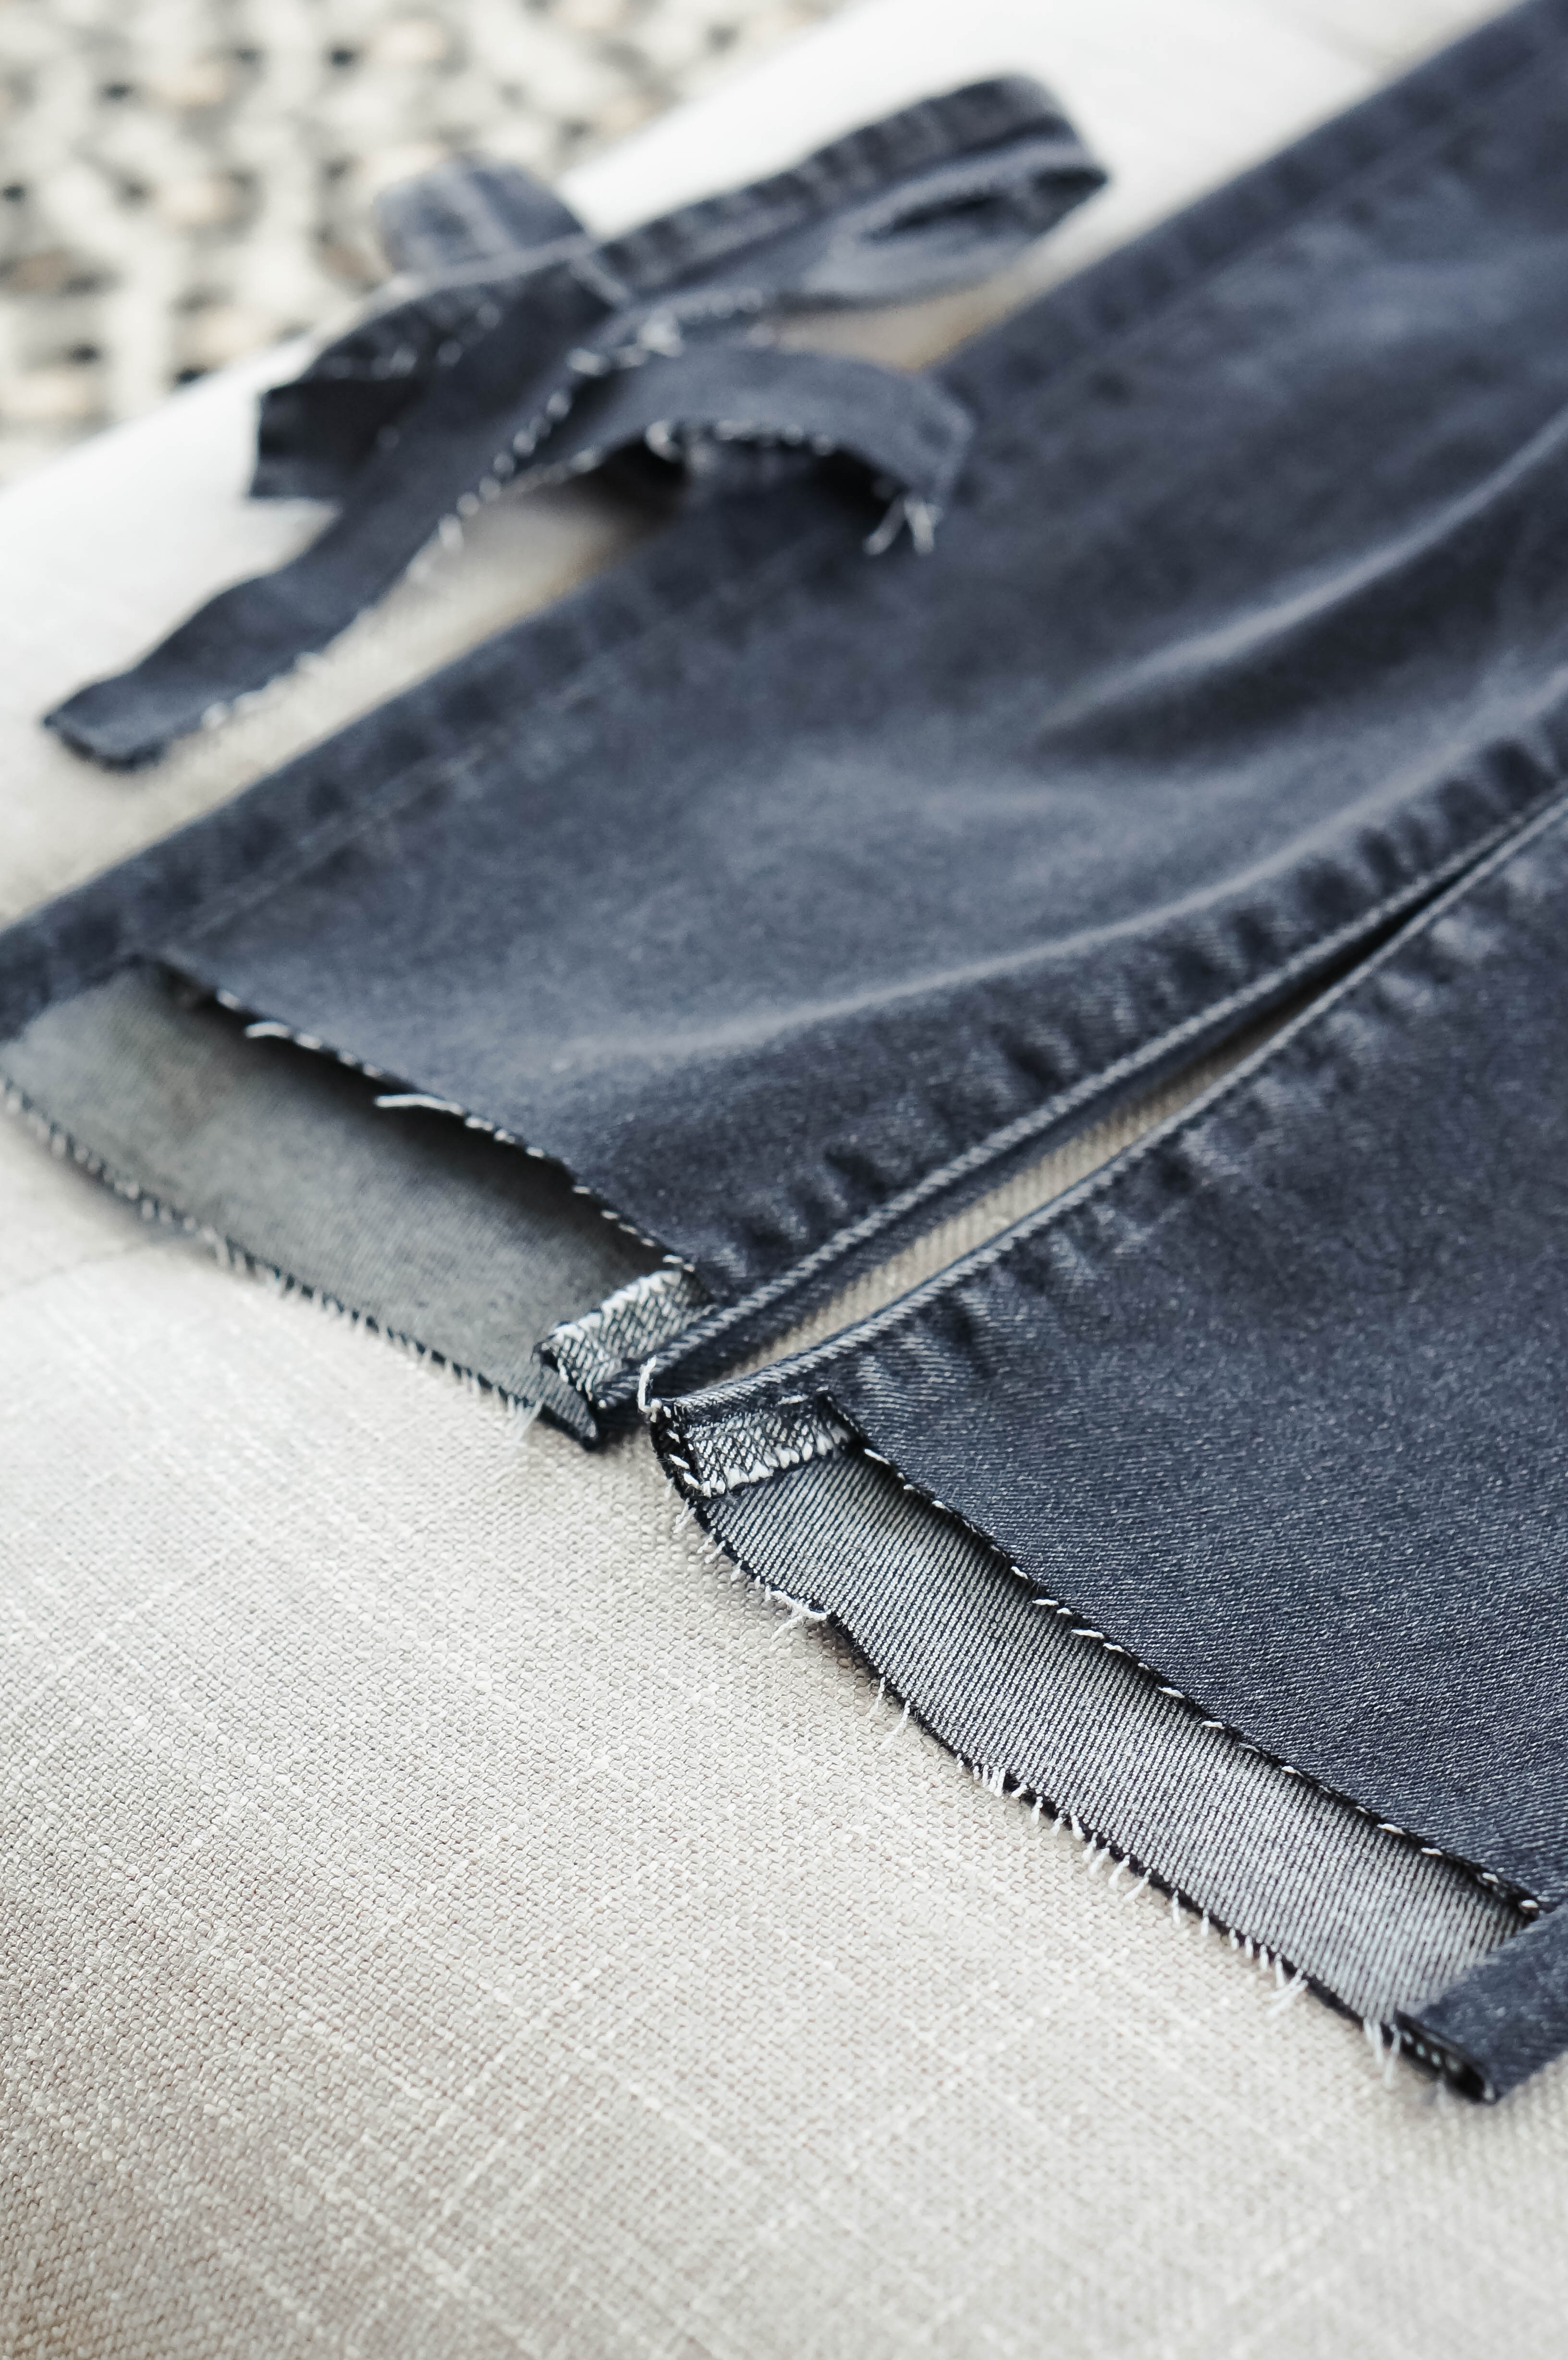 How to cut the hem off jeans